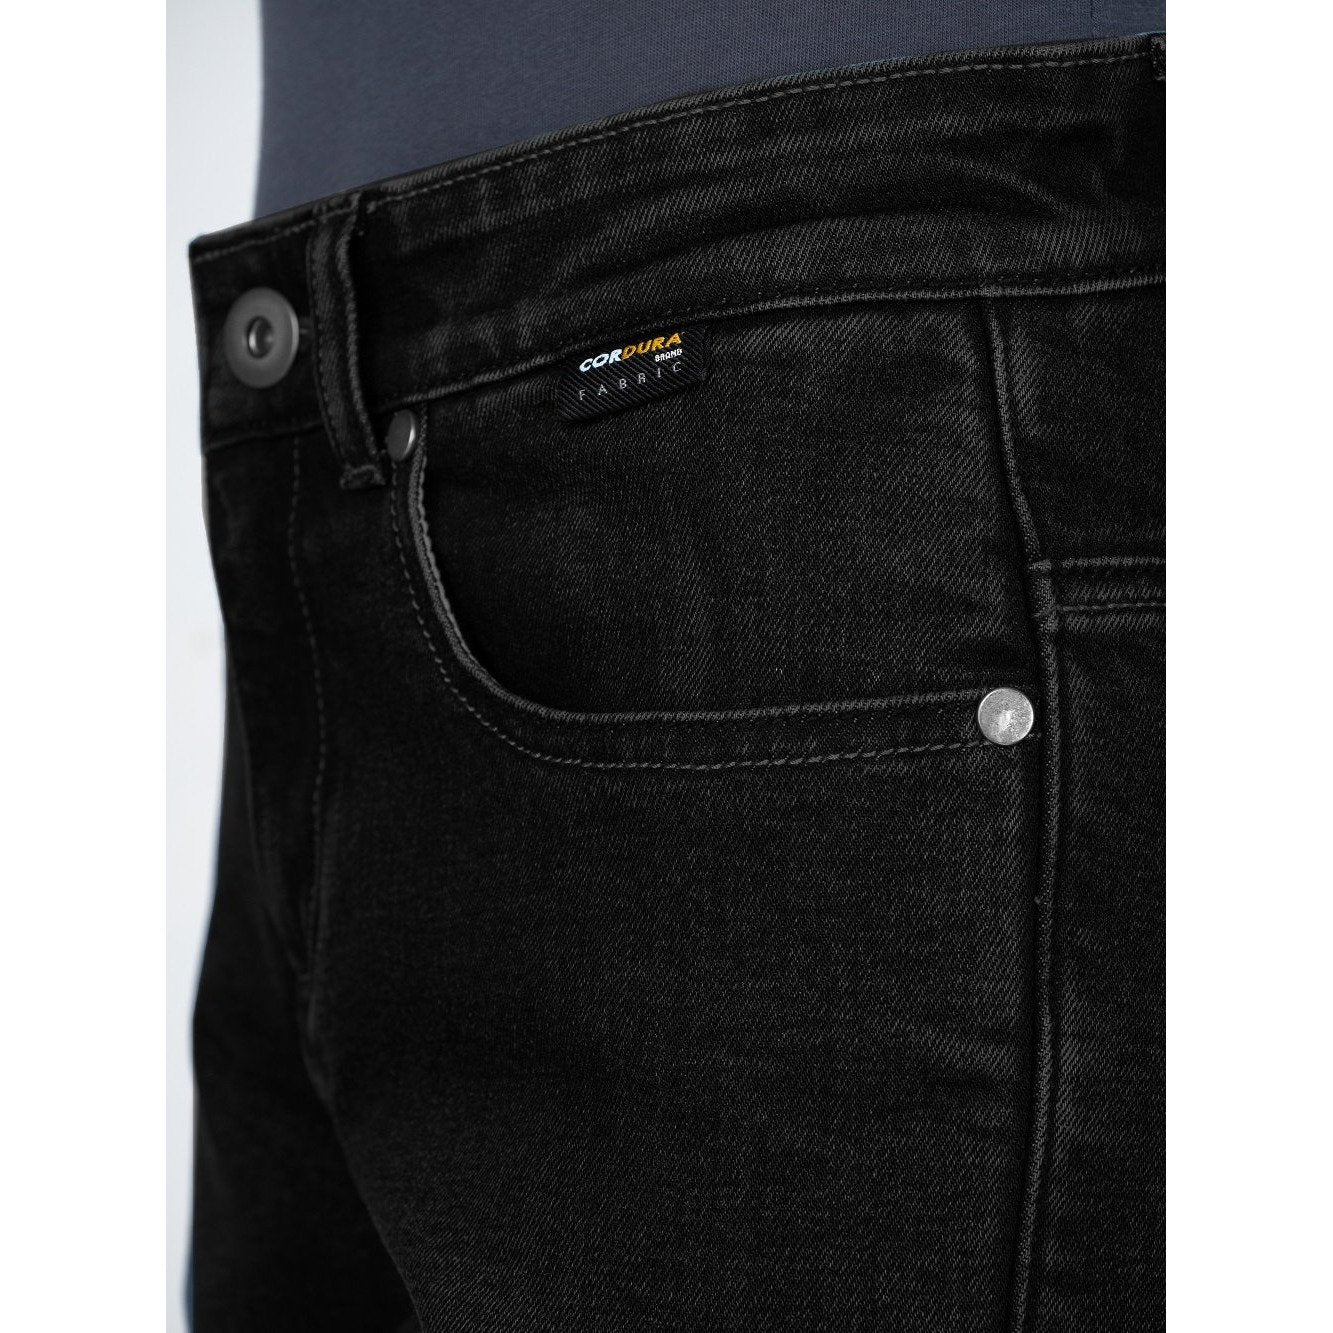 CITY SOUL WOMEN'S PROTECTED MOTORCYCLE BLACK JEANS – Corelli MG